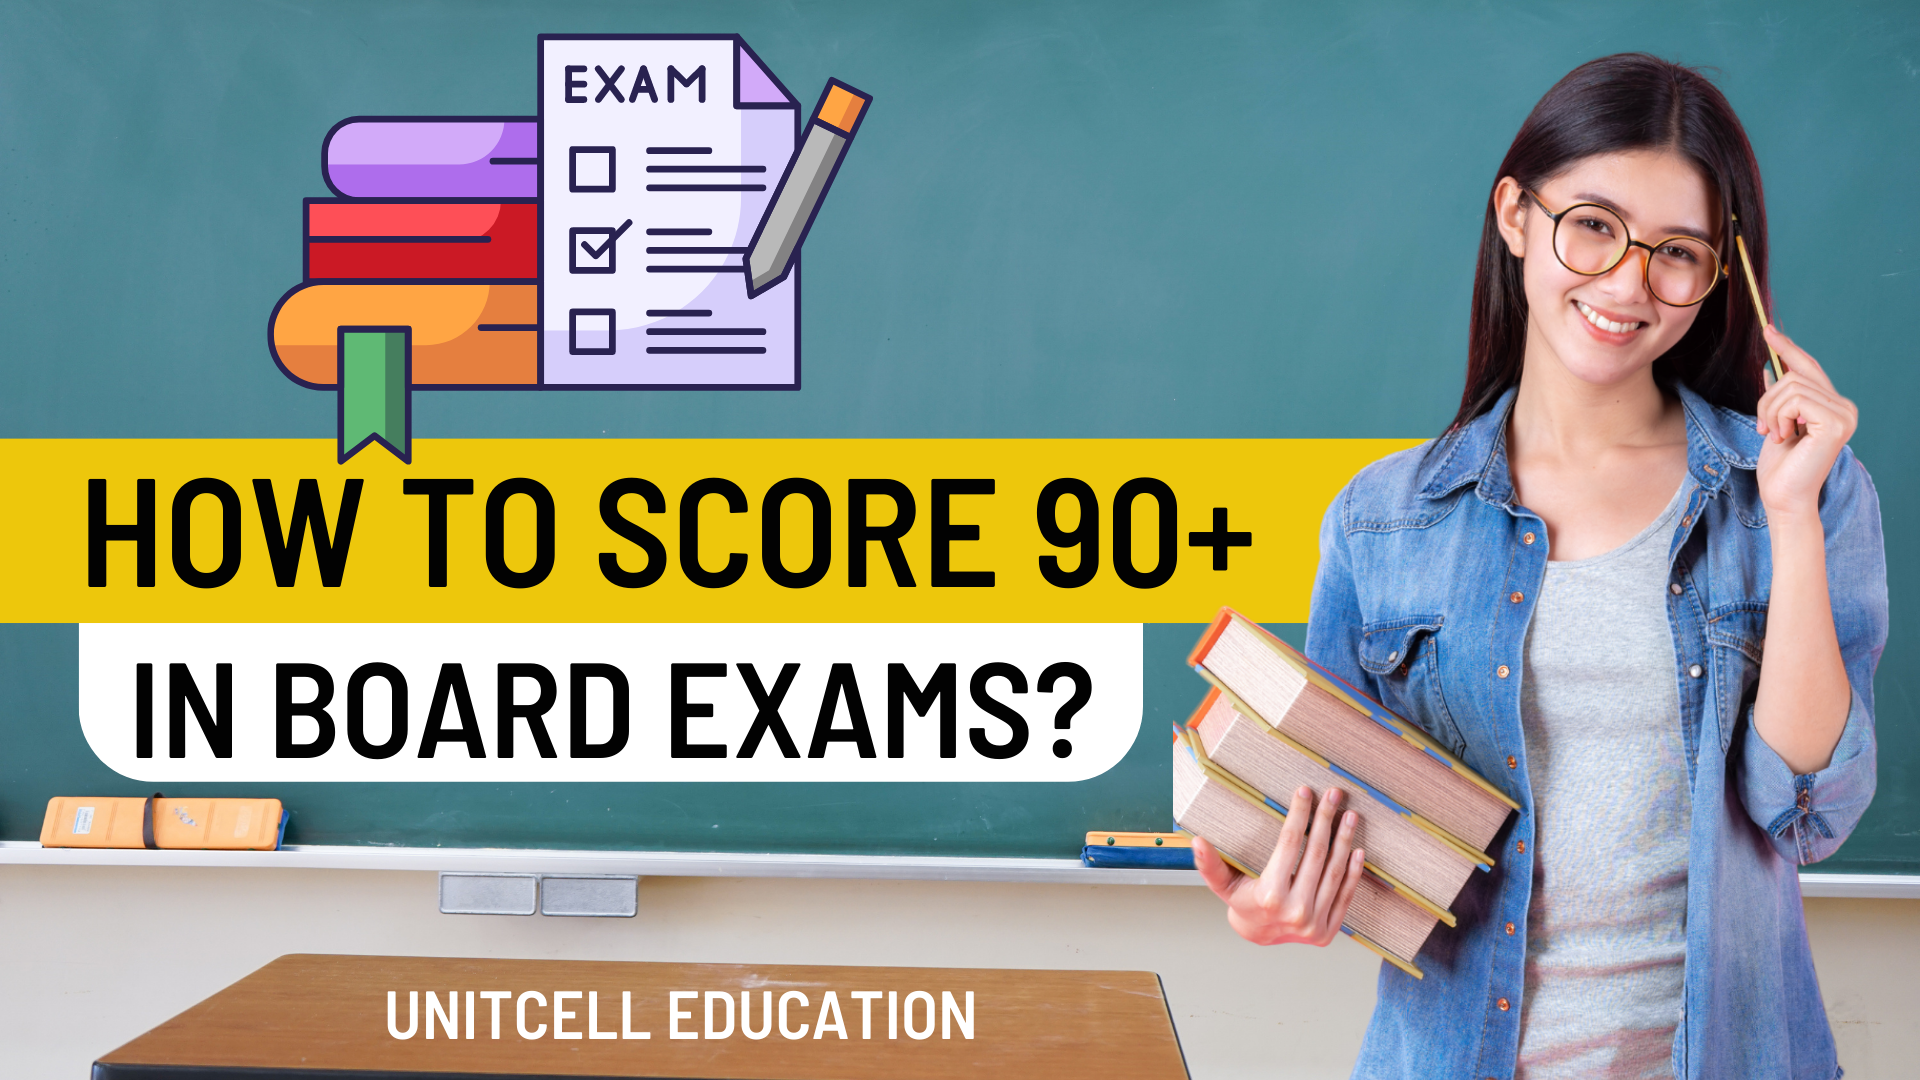 How to score 90+ in board exams?